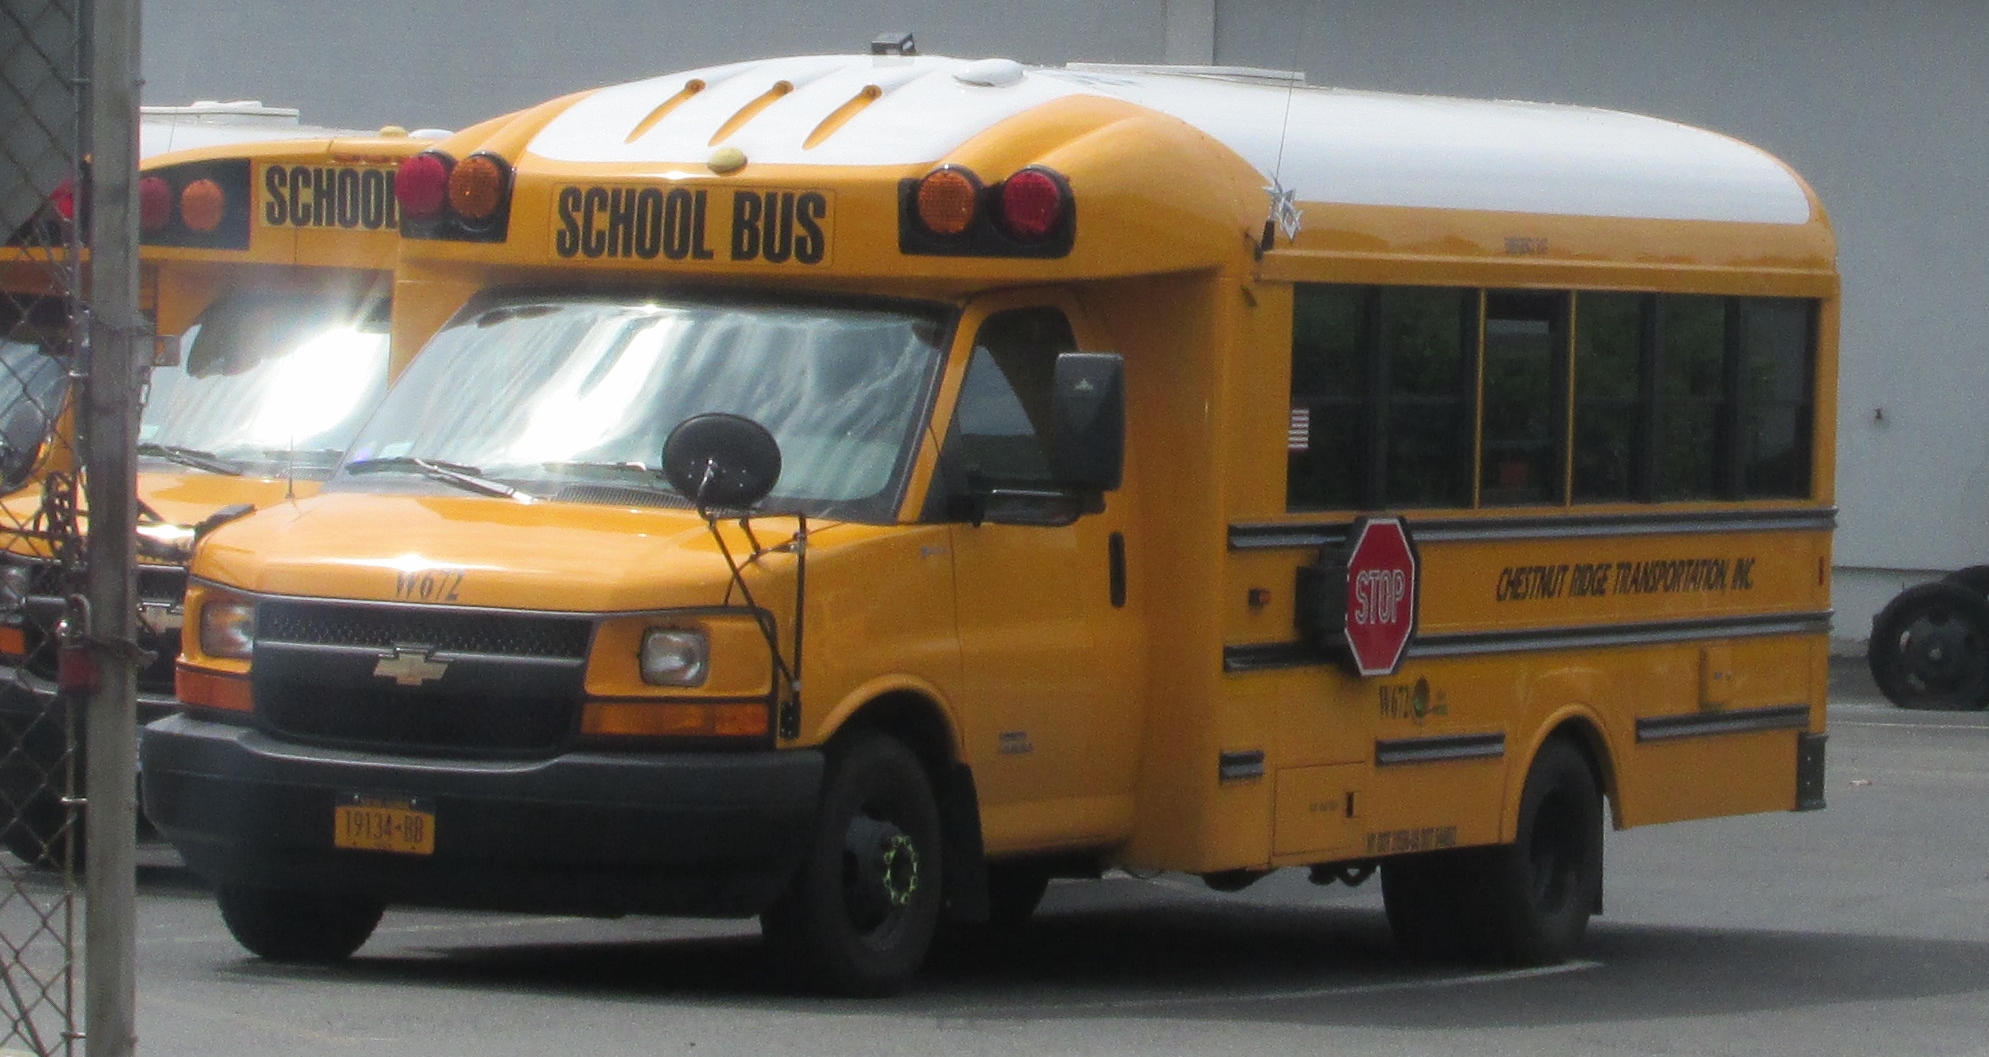 two school buses parked near each other in a parking lot